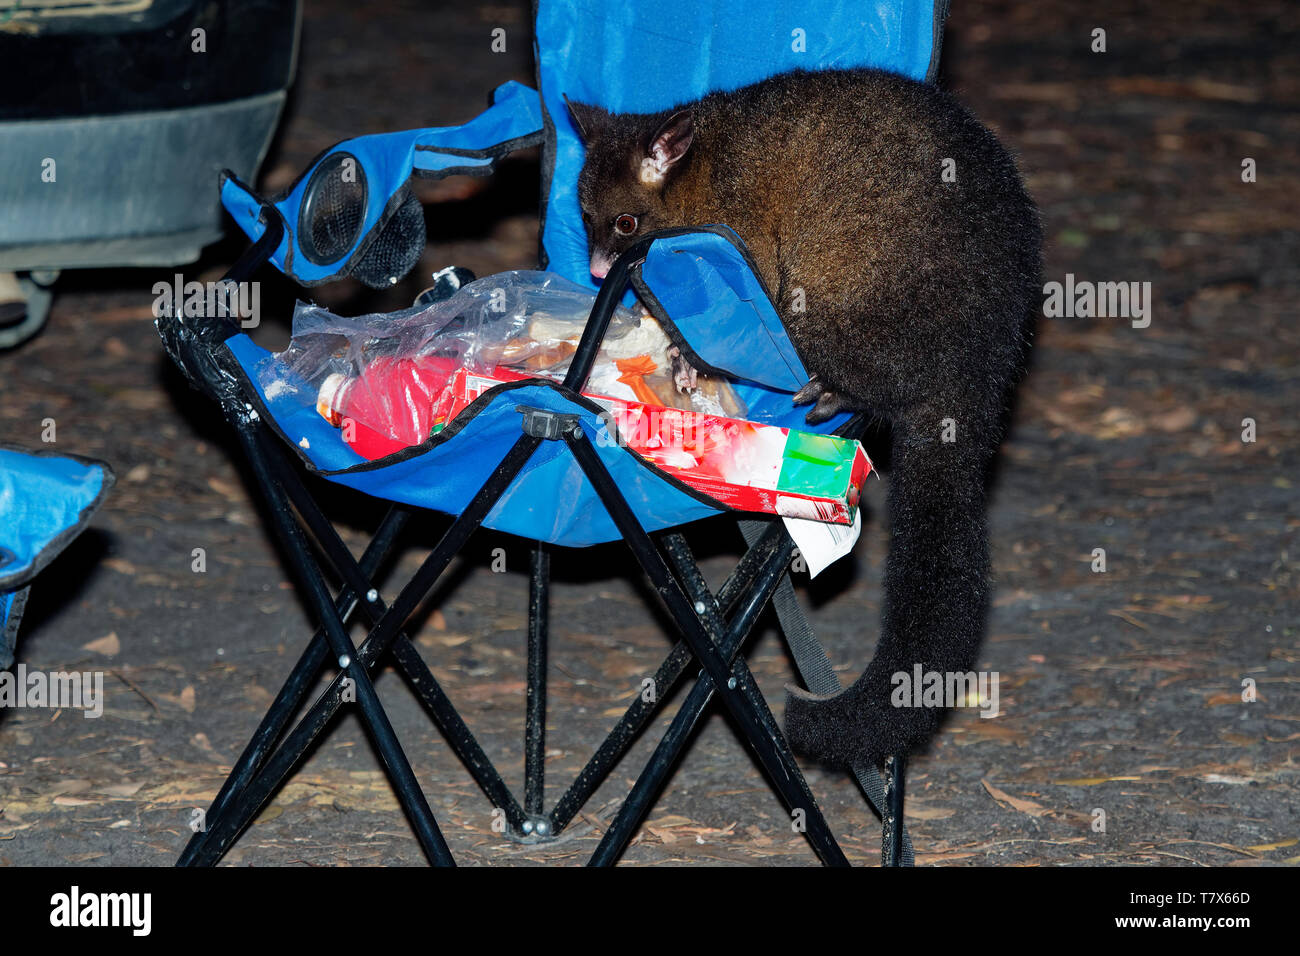 Common Brush-tailed Possum - Trichosurus vulpecula -nocturnal, semi-arboreal marsupial of Australia, introduced to New Zealand. Stealing food in the c Stock Photo